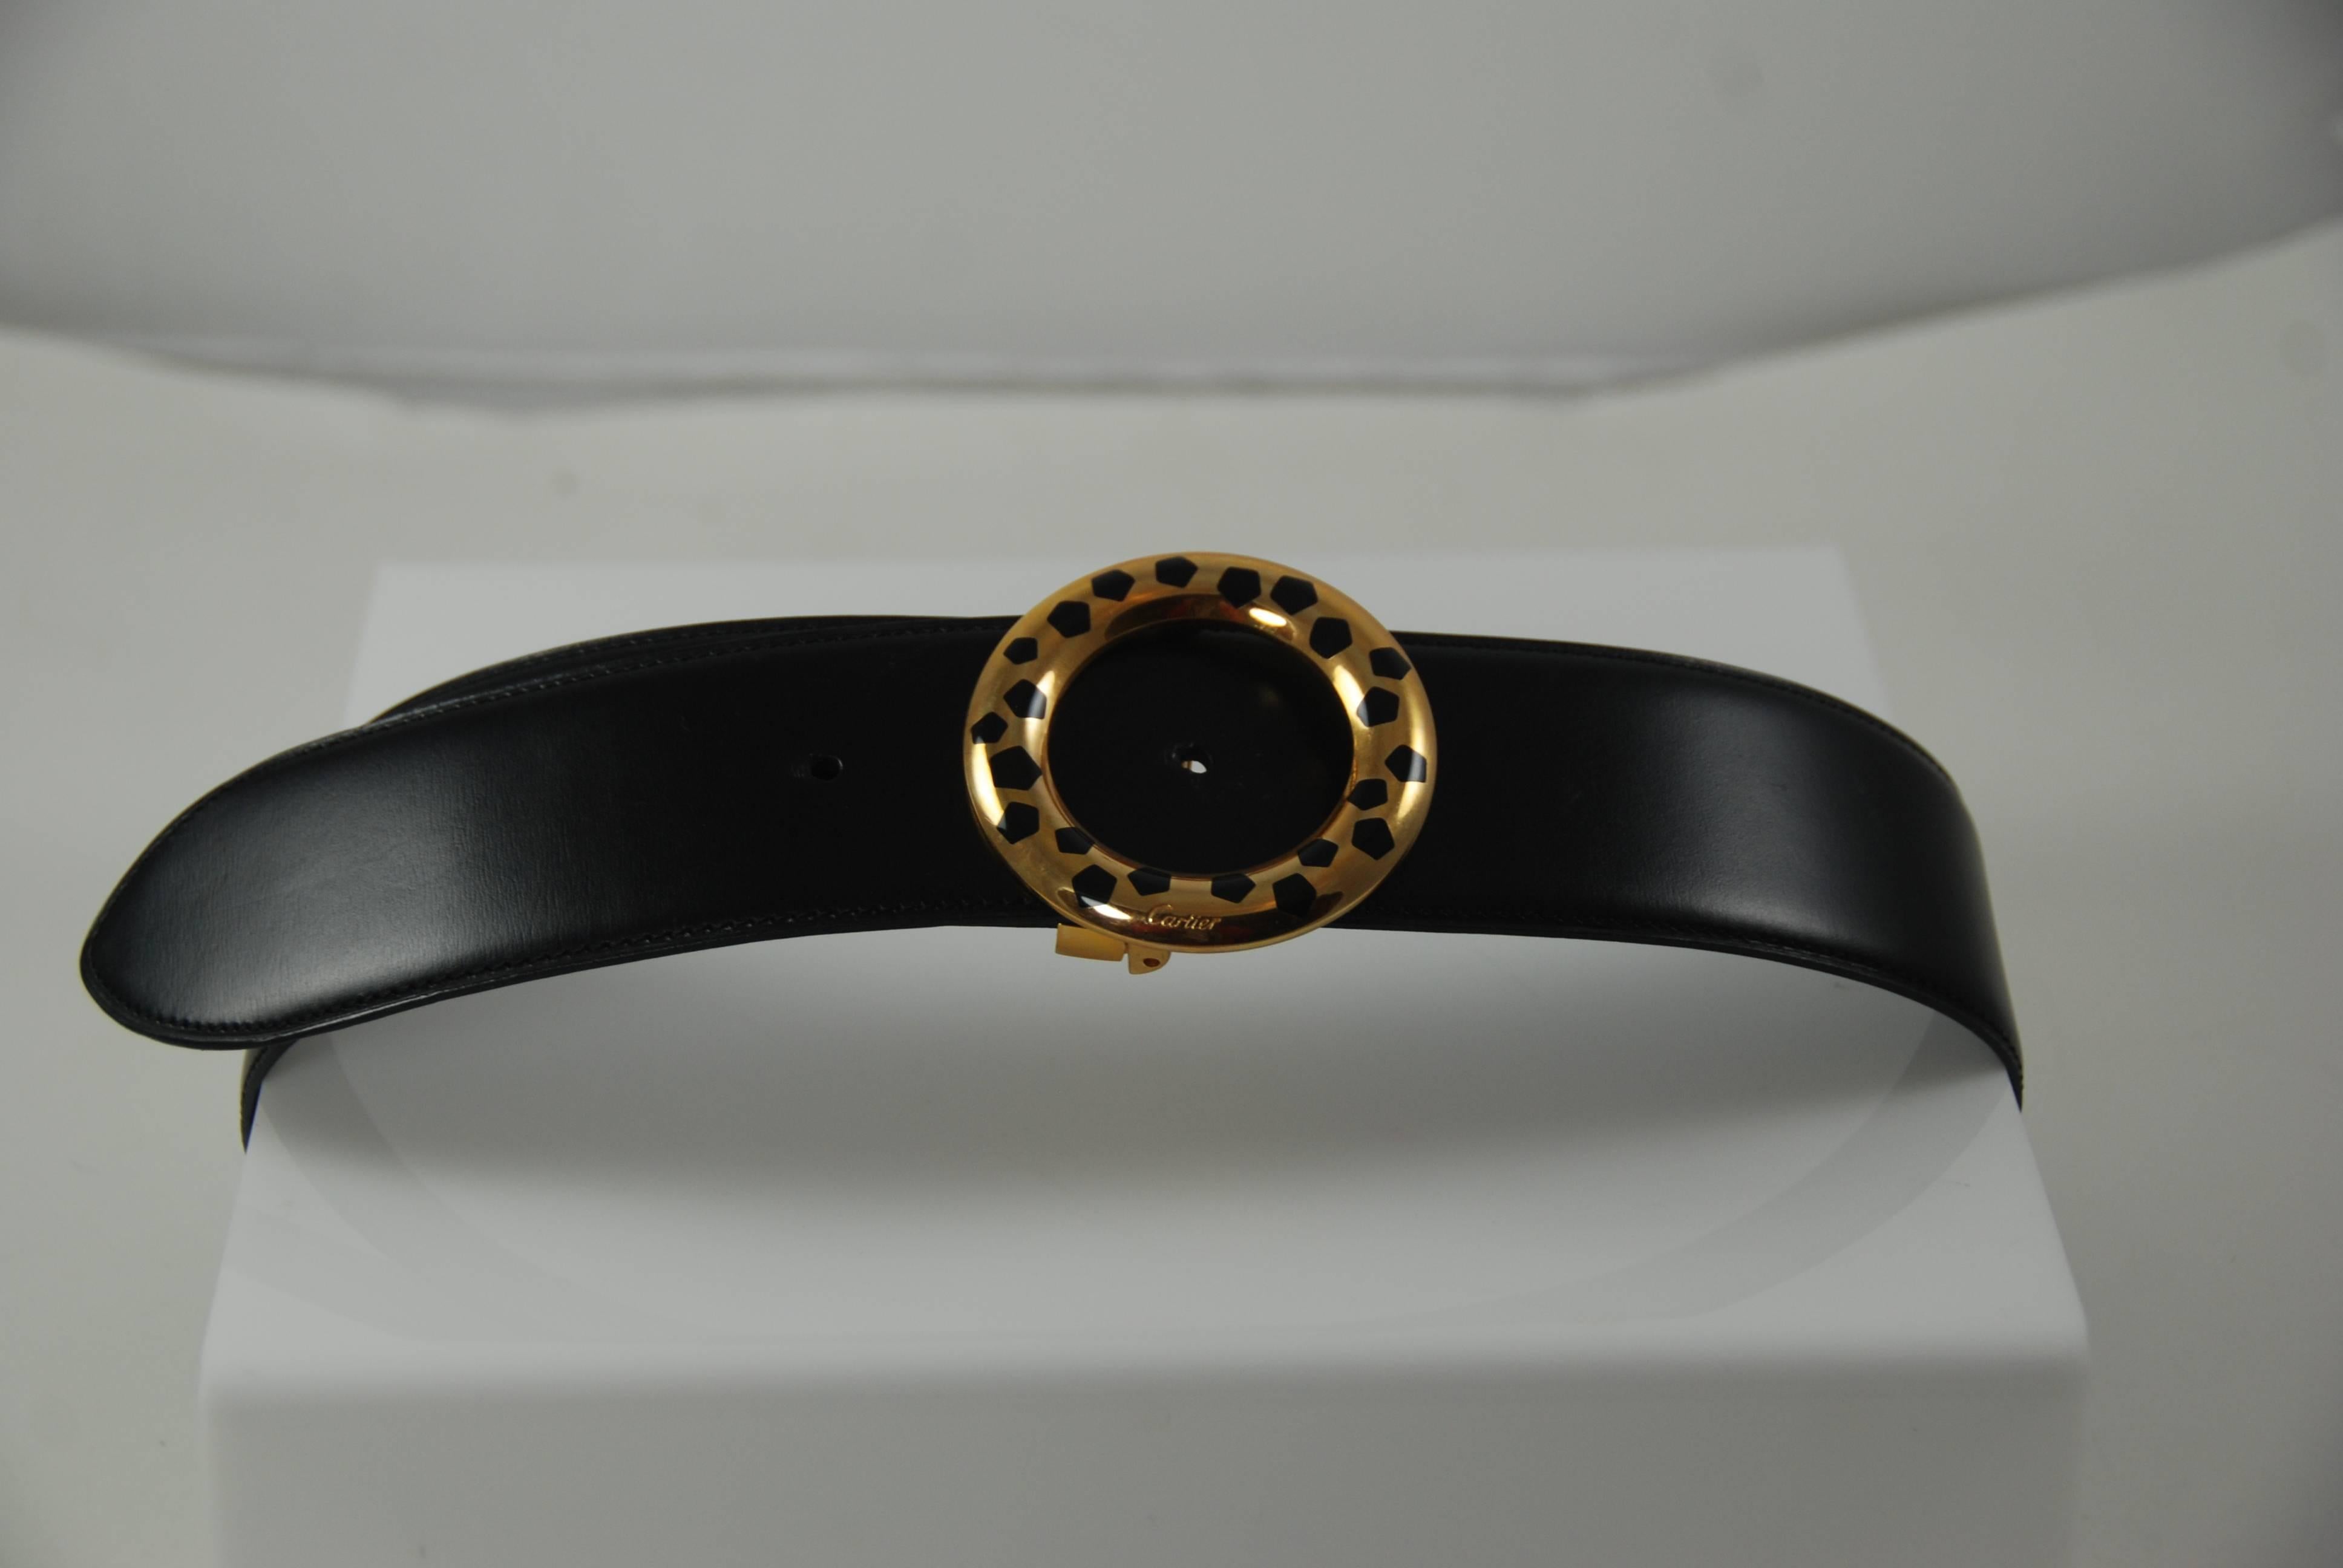 Cartier Black Belt Paris In Excellent Condition For Sale In New York, NY